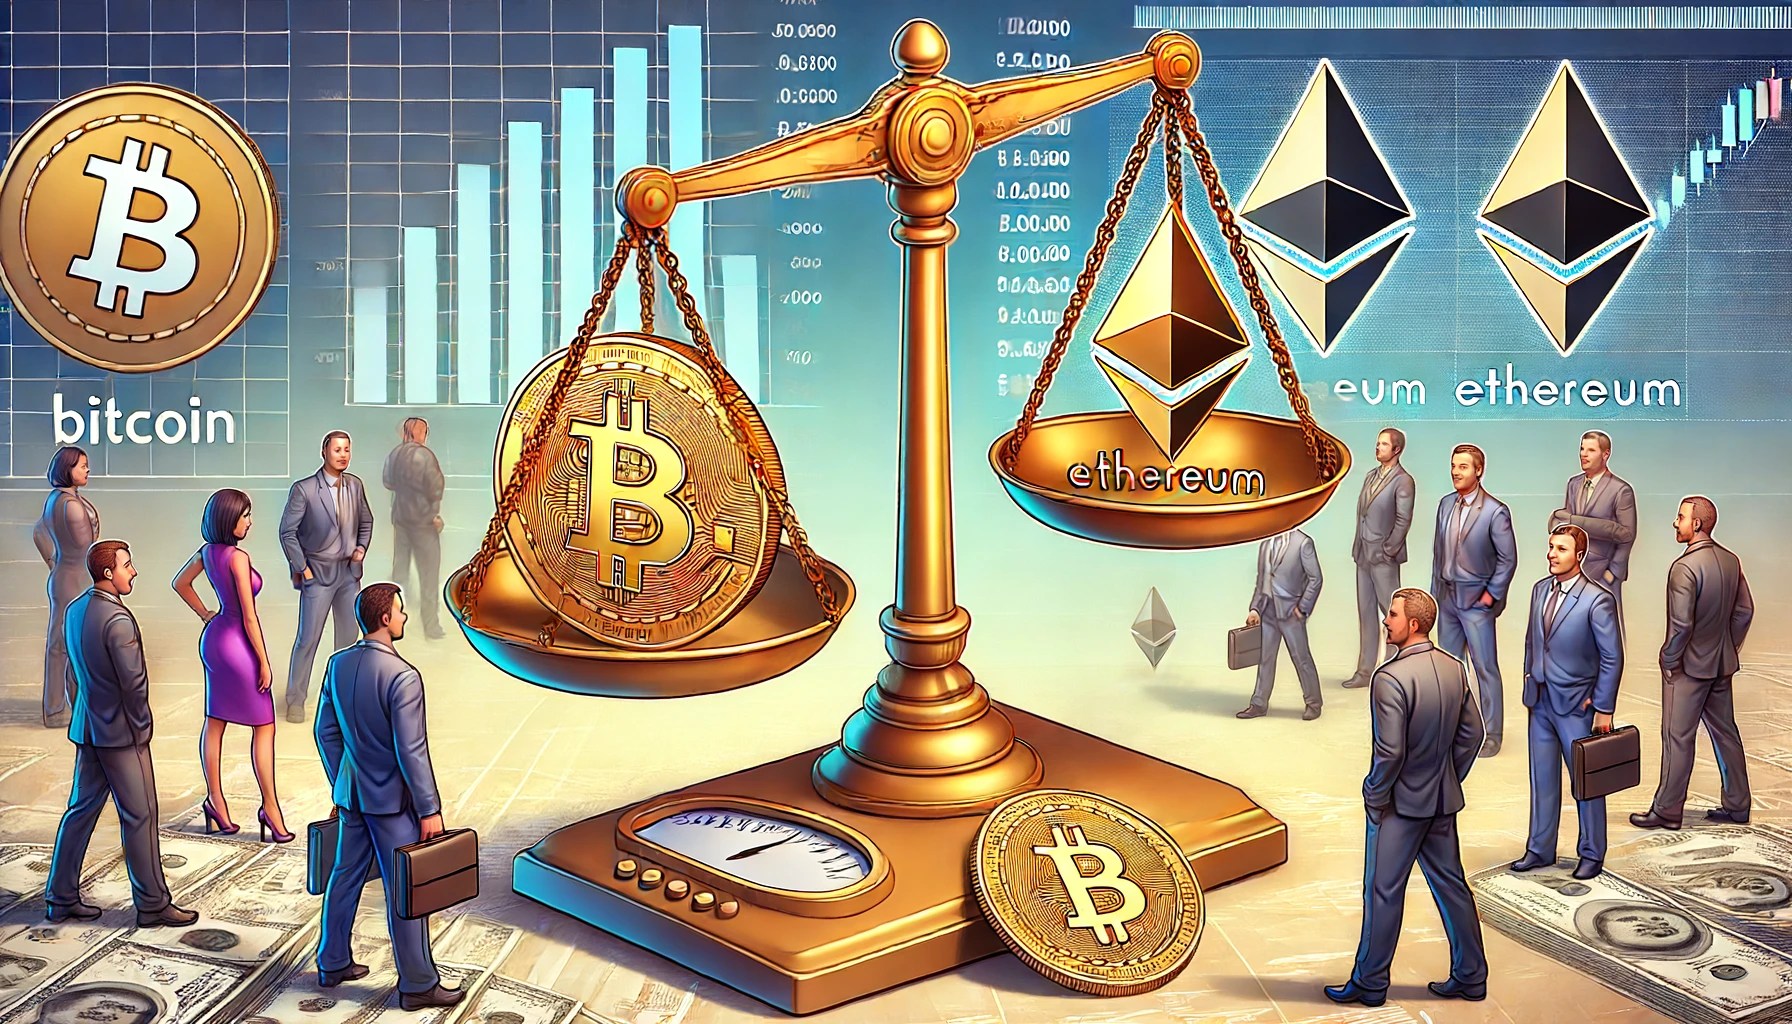 Are Investors Ditching Ethereum For Bitcoin? Data Could Say So